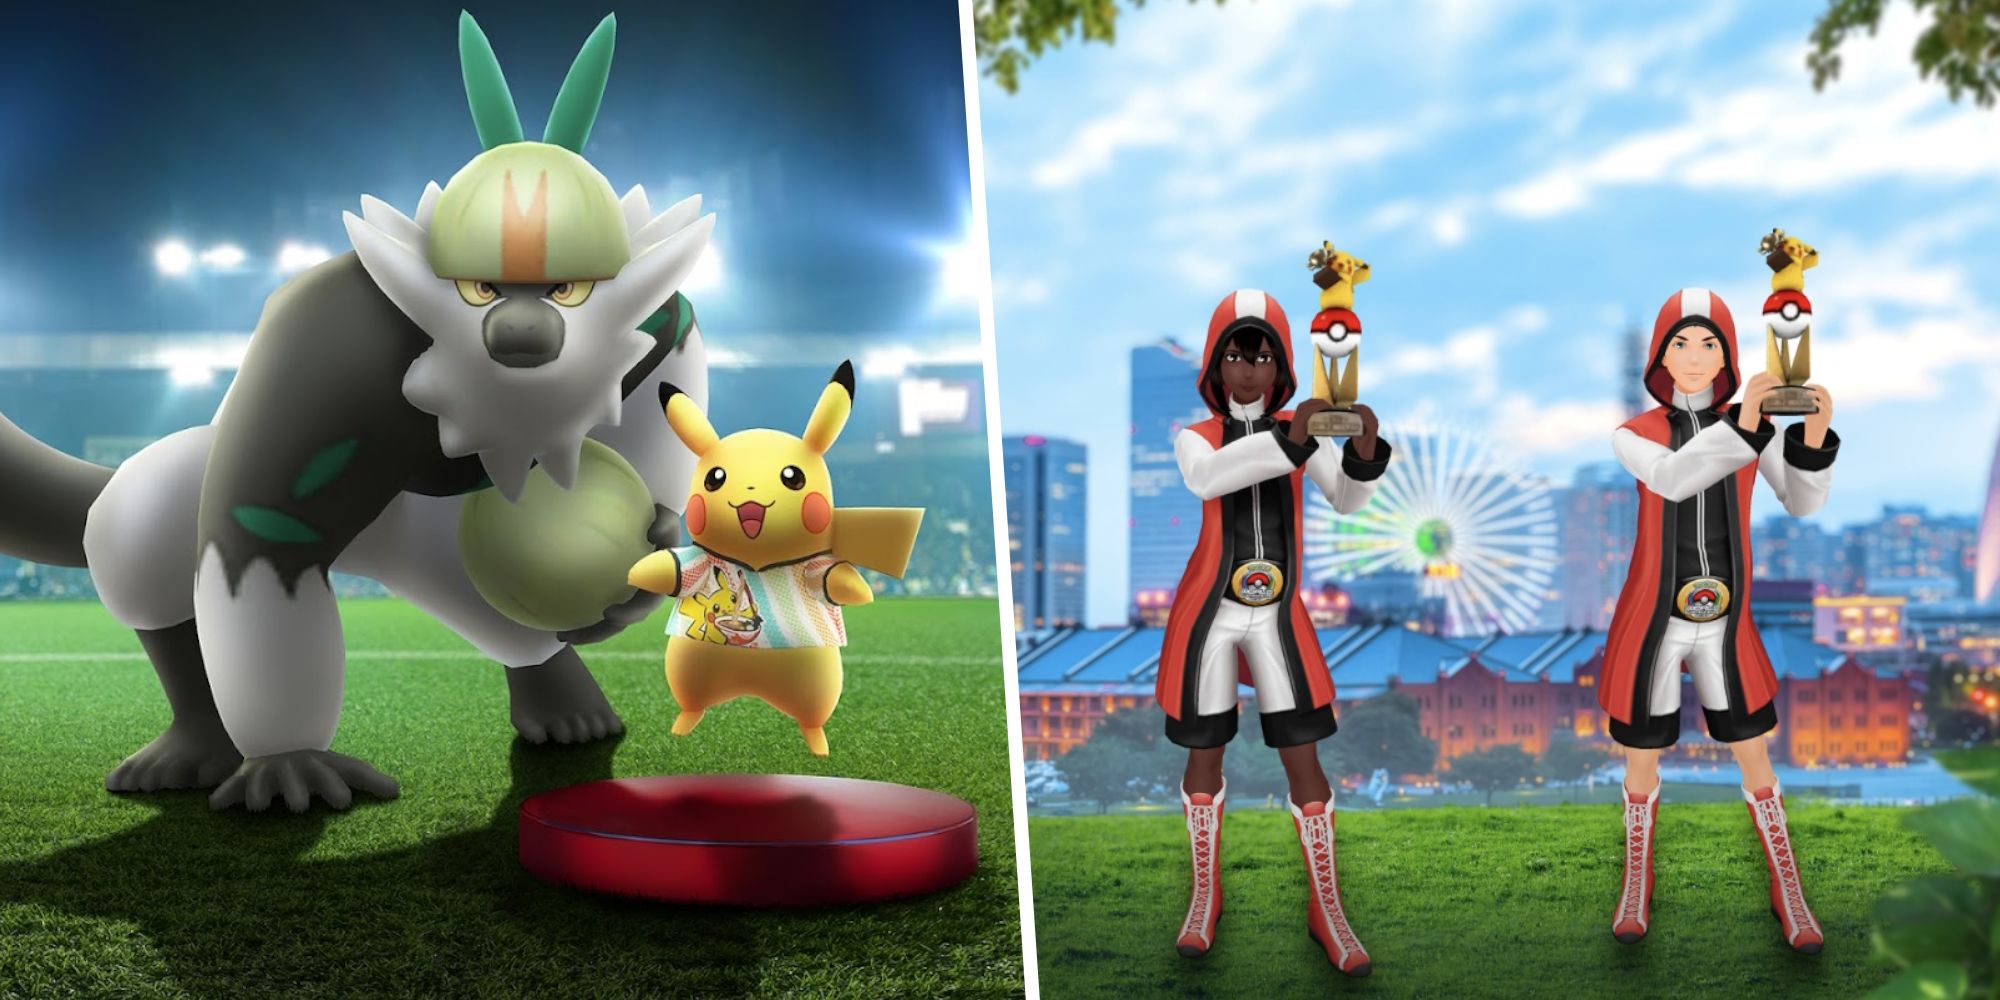 Pokemon Go 2023 World Championships featuring Passimian, Pikachu, and 2 trainers.